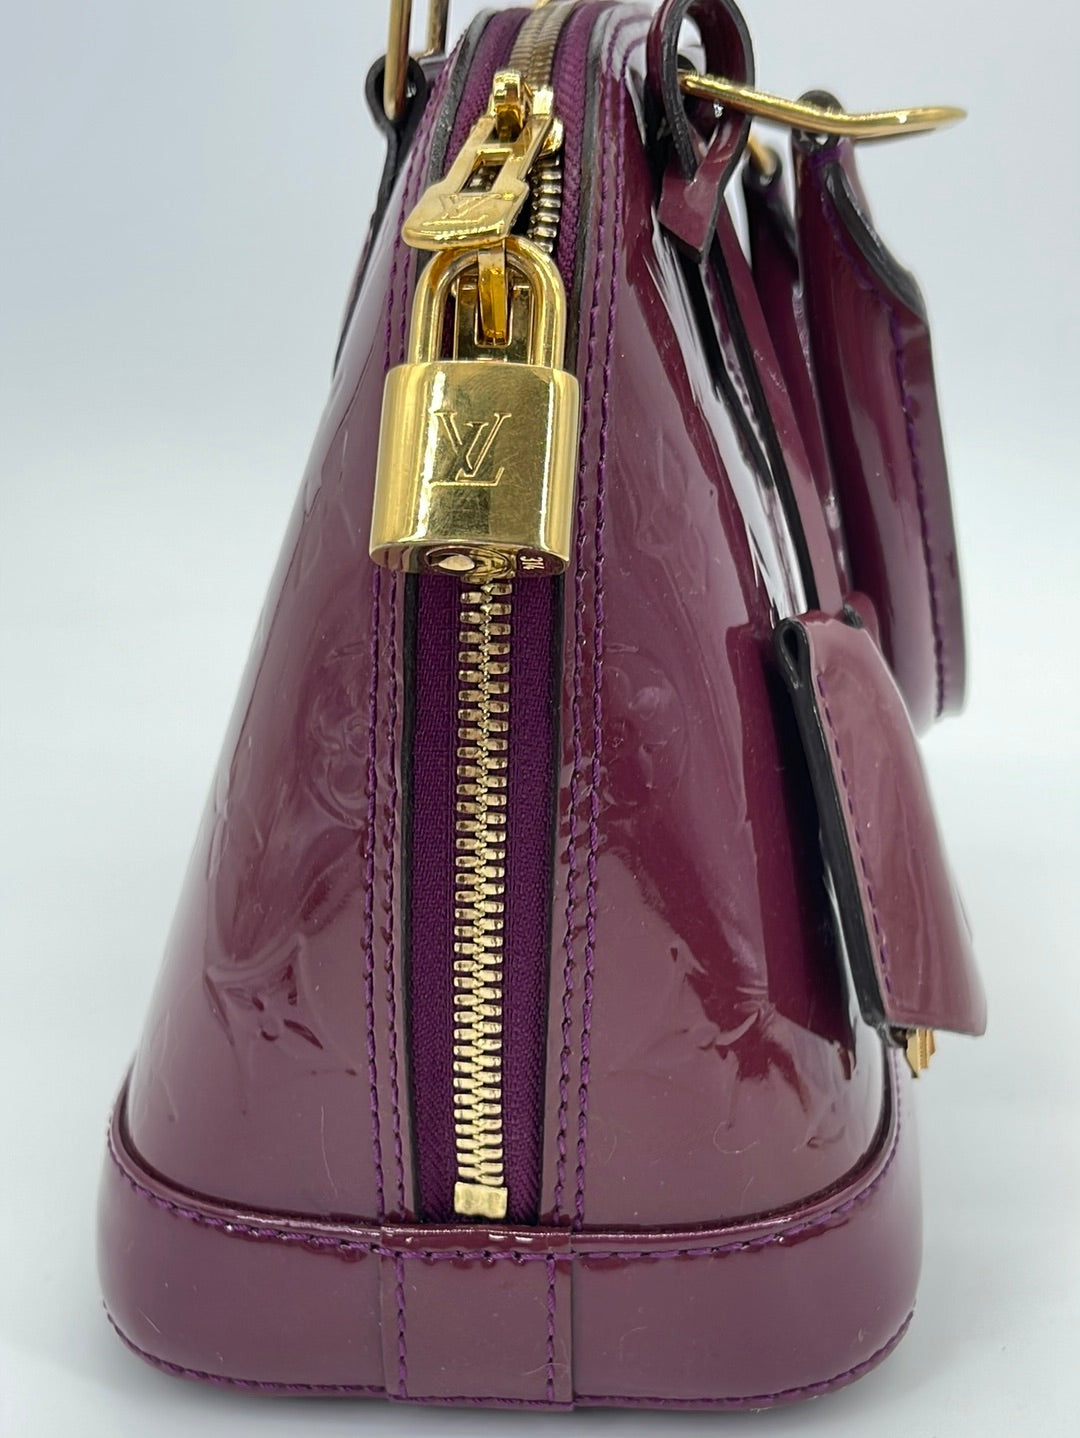 PRELOVED Louis Vuitton PURPLE Vernis Alma BB Crossbody Bag SN1124 052923 $400 OFF LIVE SHOW - NO ADDITIONAL DISCOUNTS